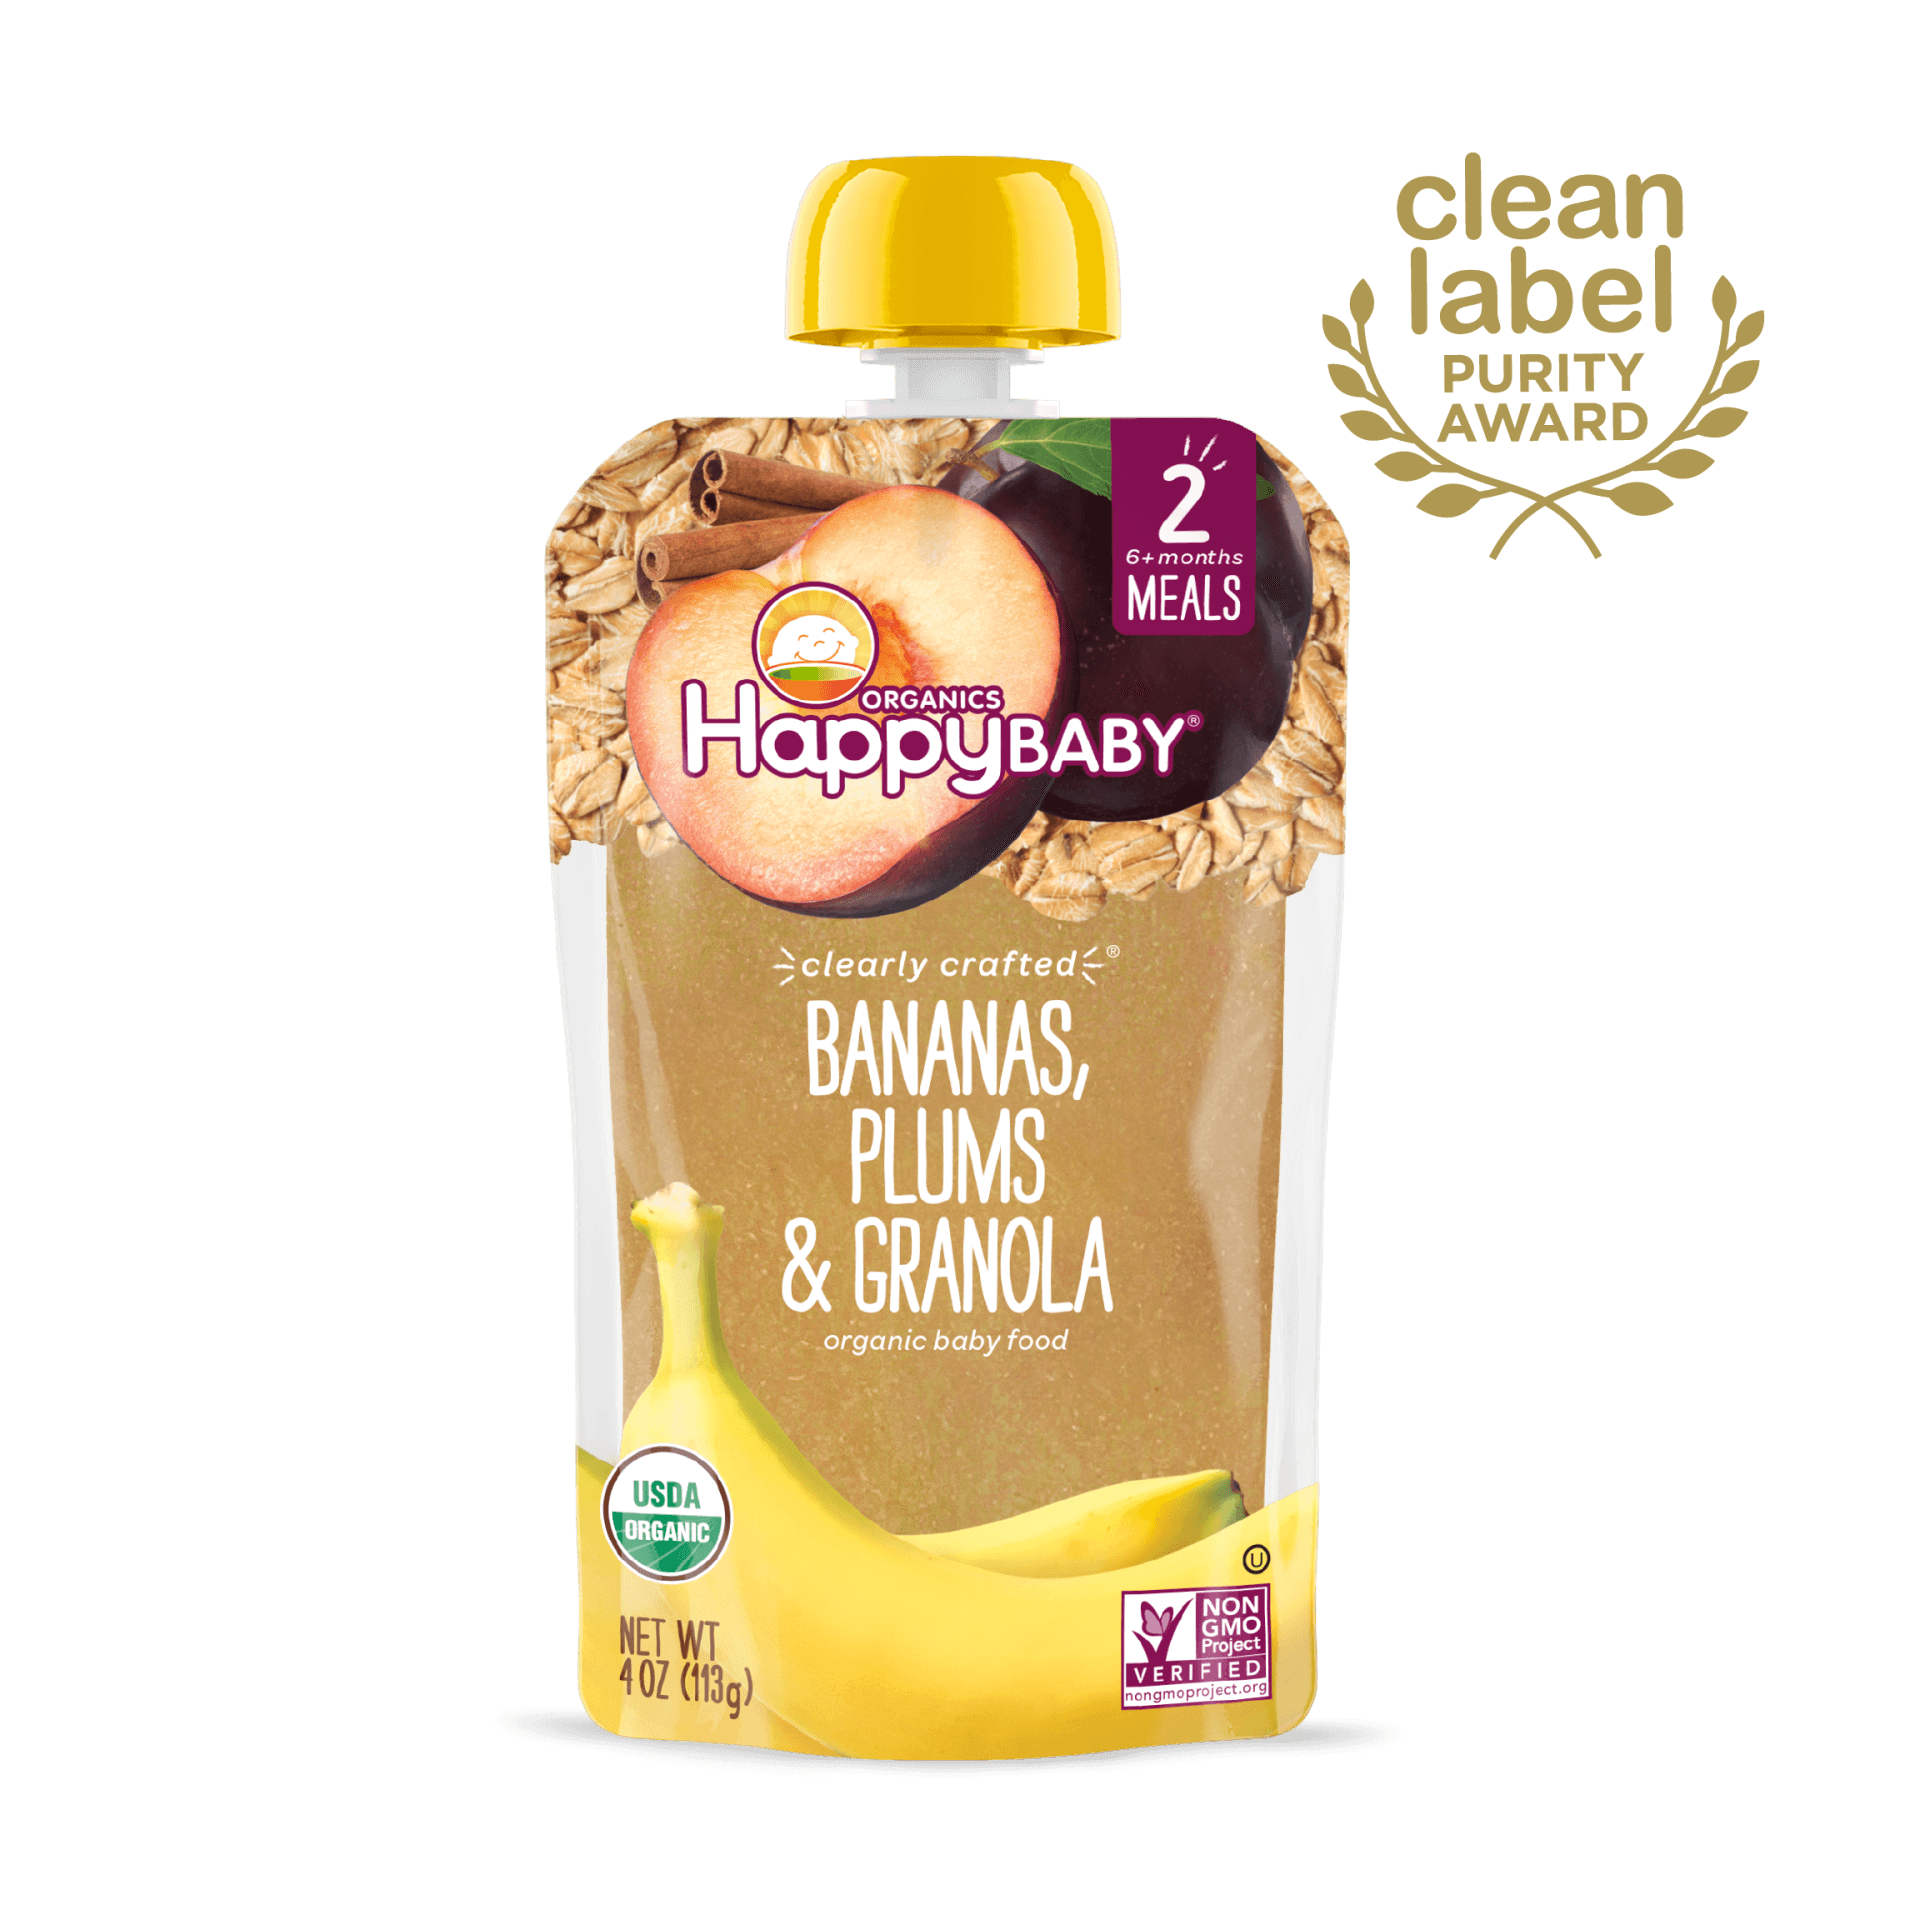 Happy Baby S2 - Clearly Crafted Bananas Plums & Granola 4Oz pouch 16 units per case 4.0 oz